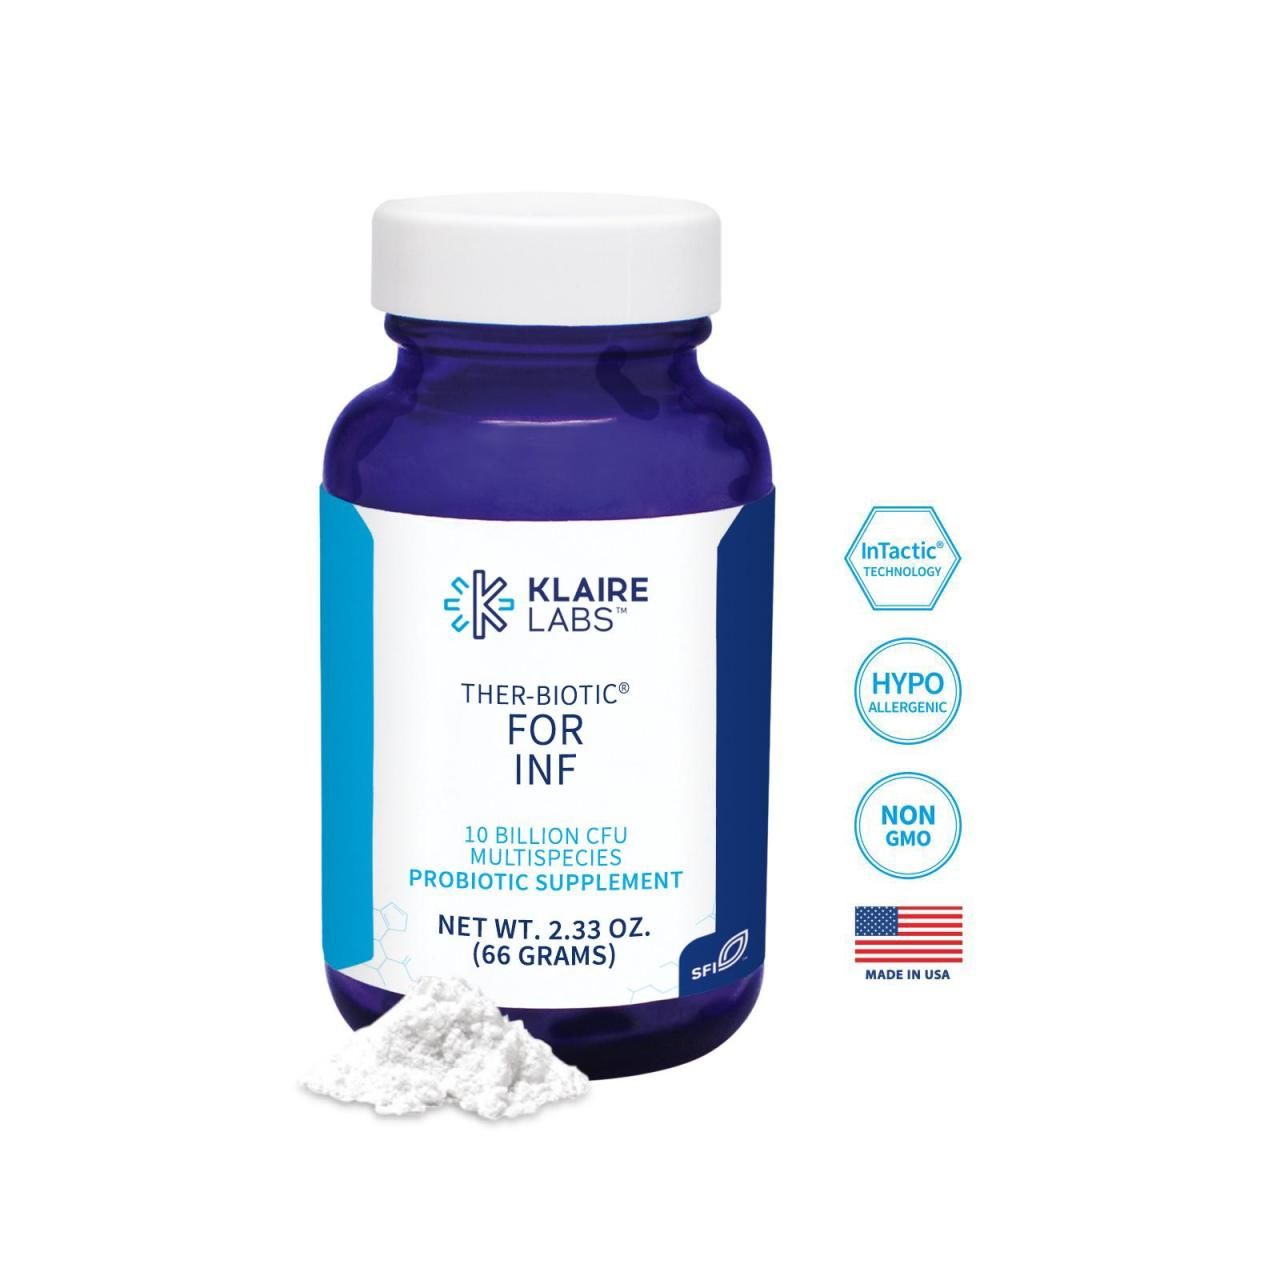 Klaire Labs Ther-Biotic Powder For INF 66 Gram